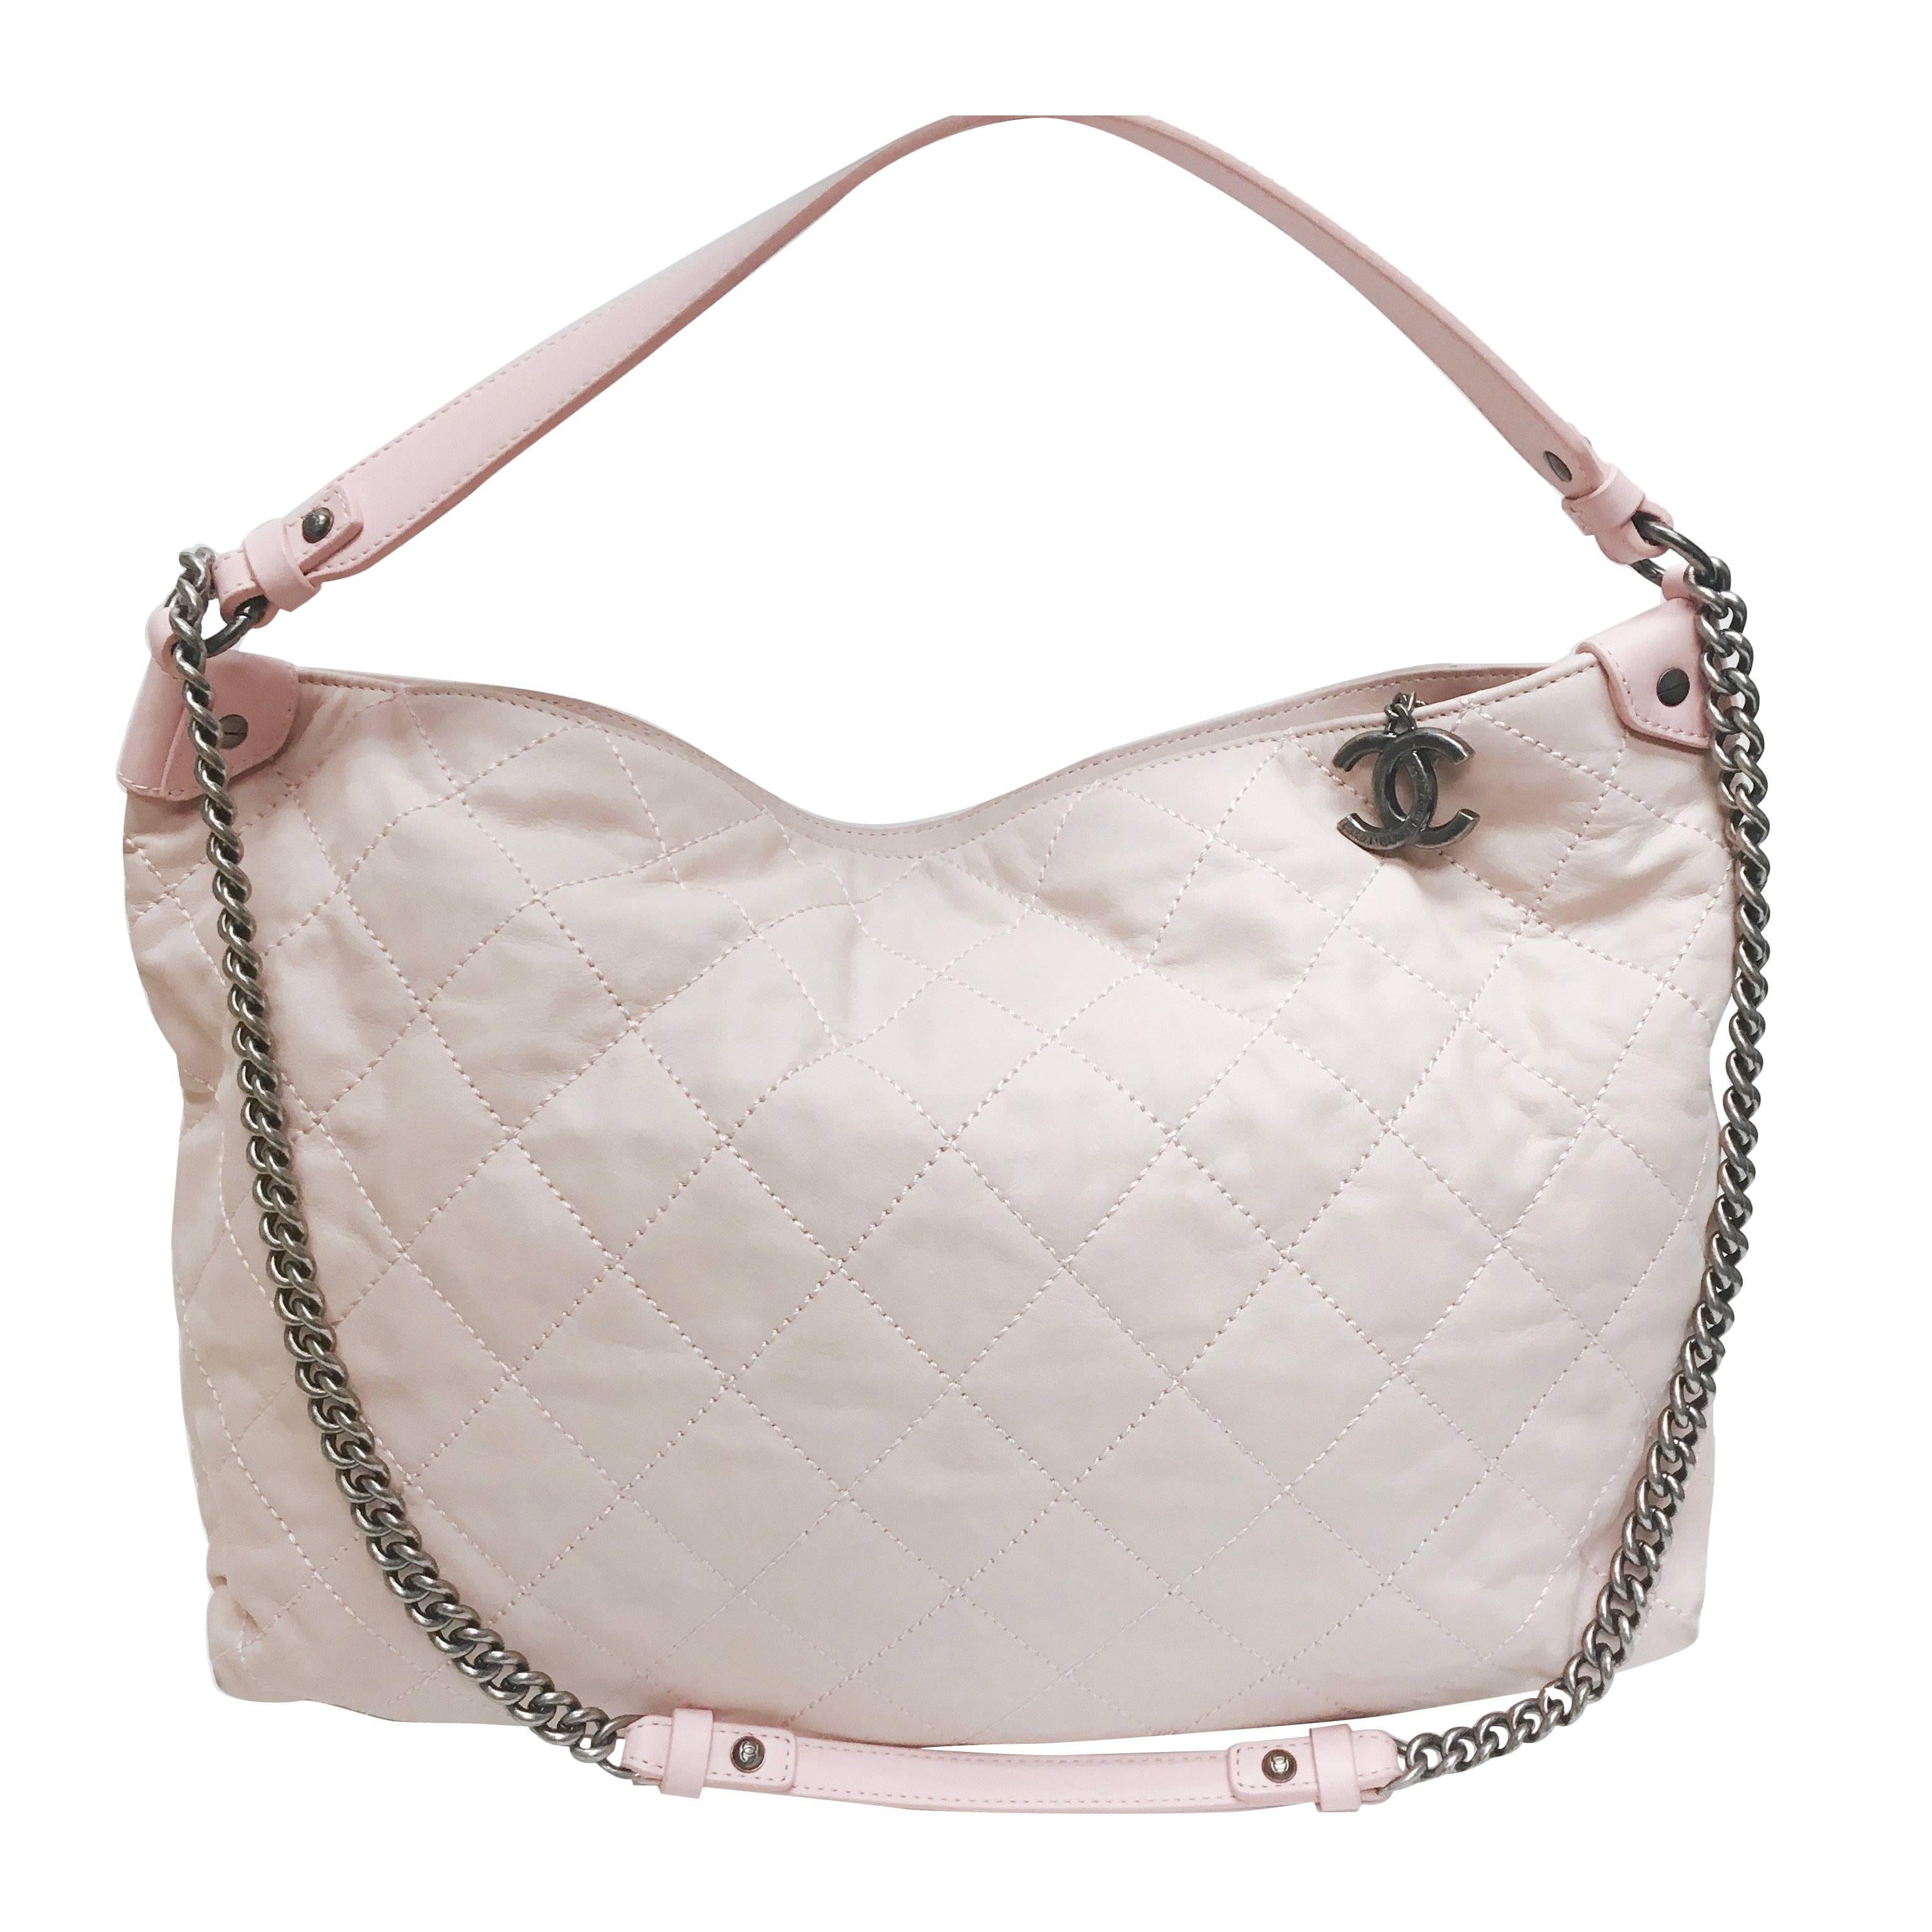 CHANEL Light Pink Quilted Calfskin Leather Coco Daily Hobo Bag 13C